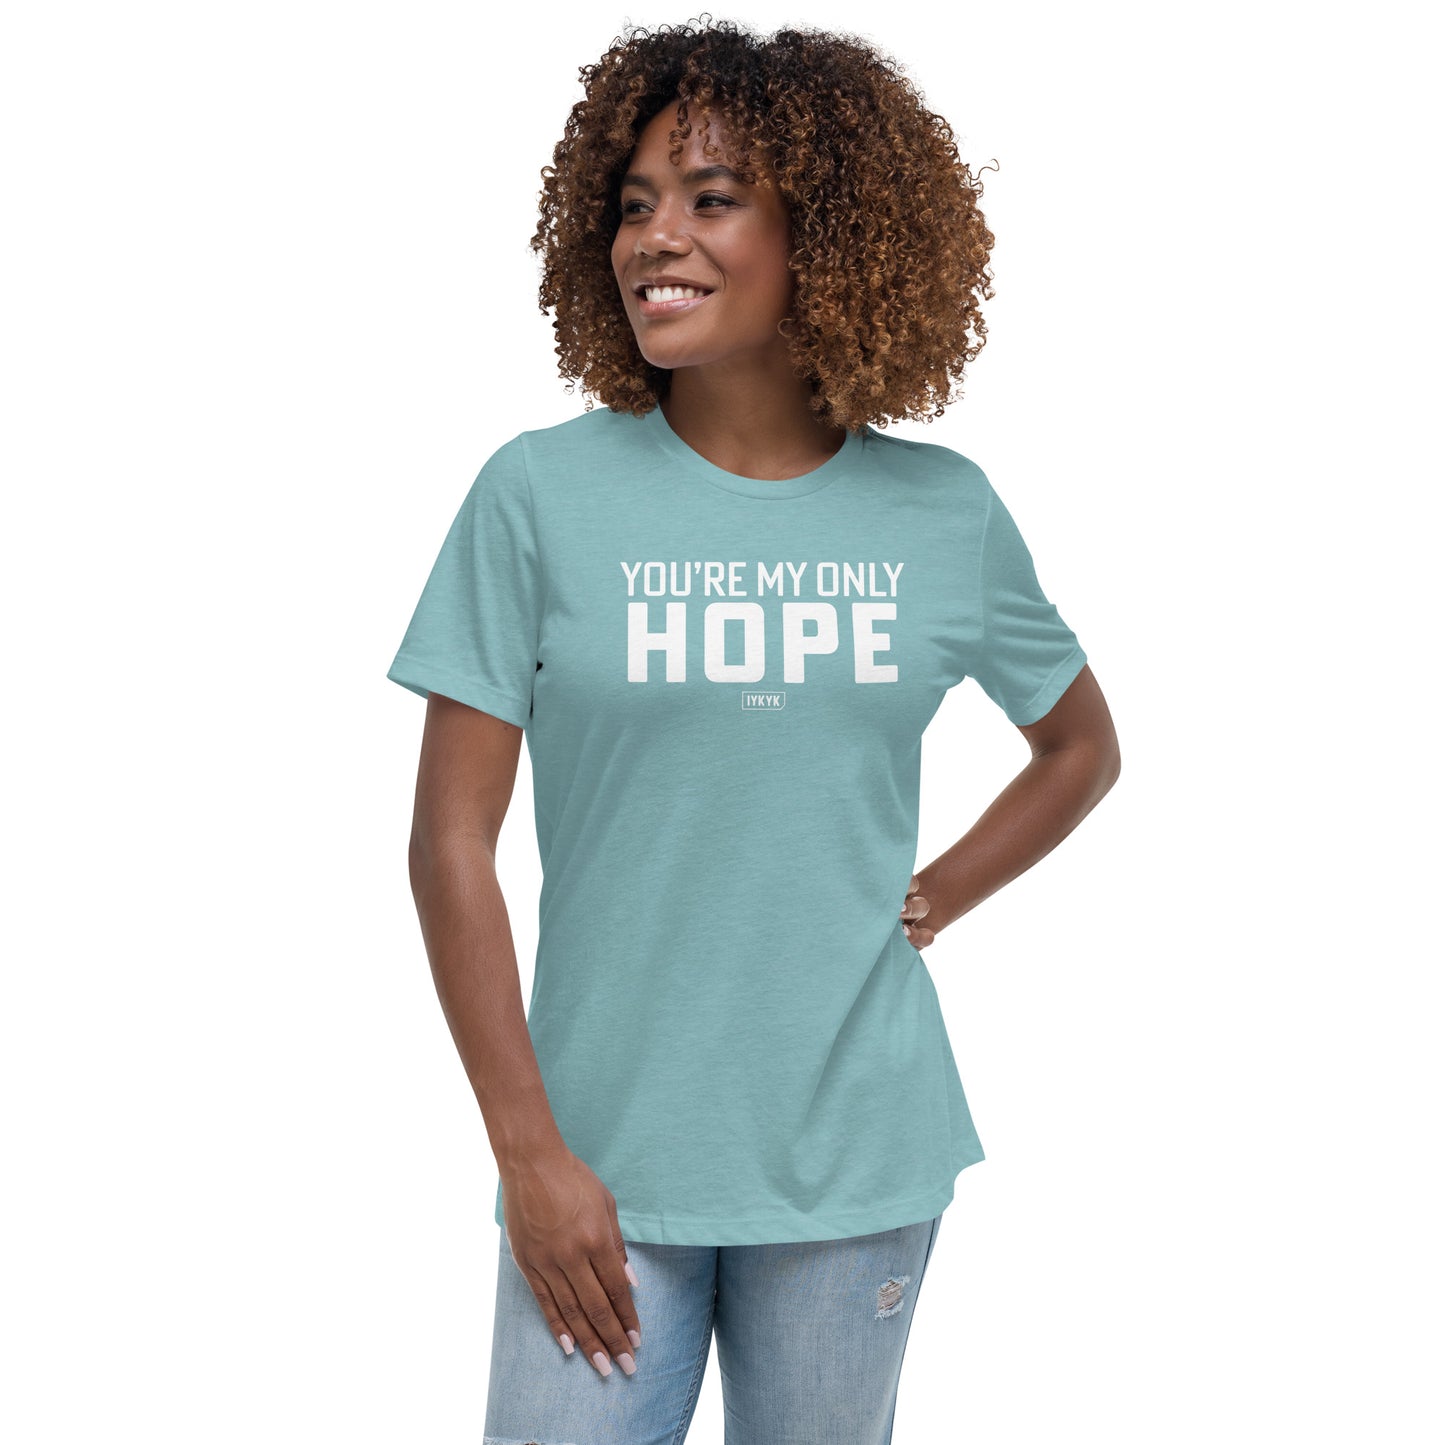 Premium Everyday Women's You're My Only Hope Star Wars Tee